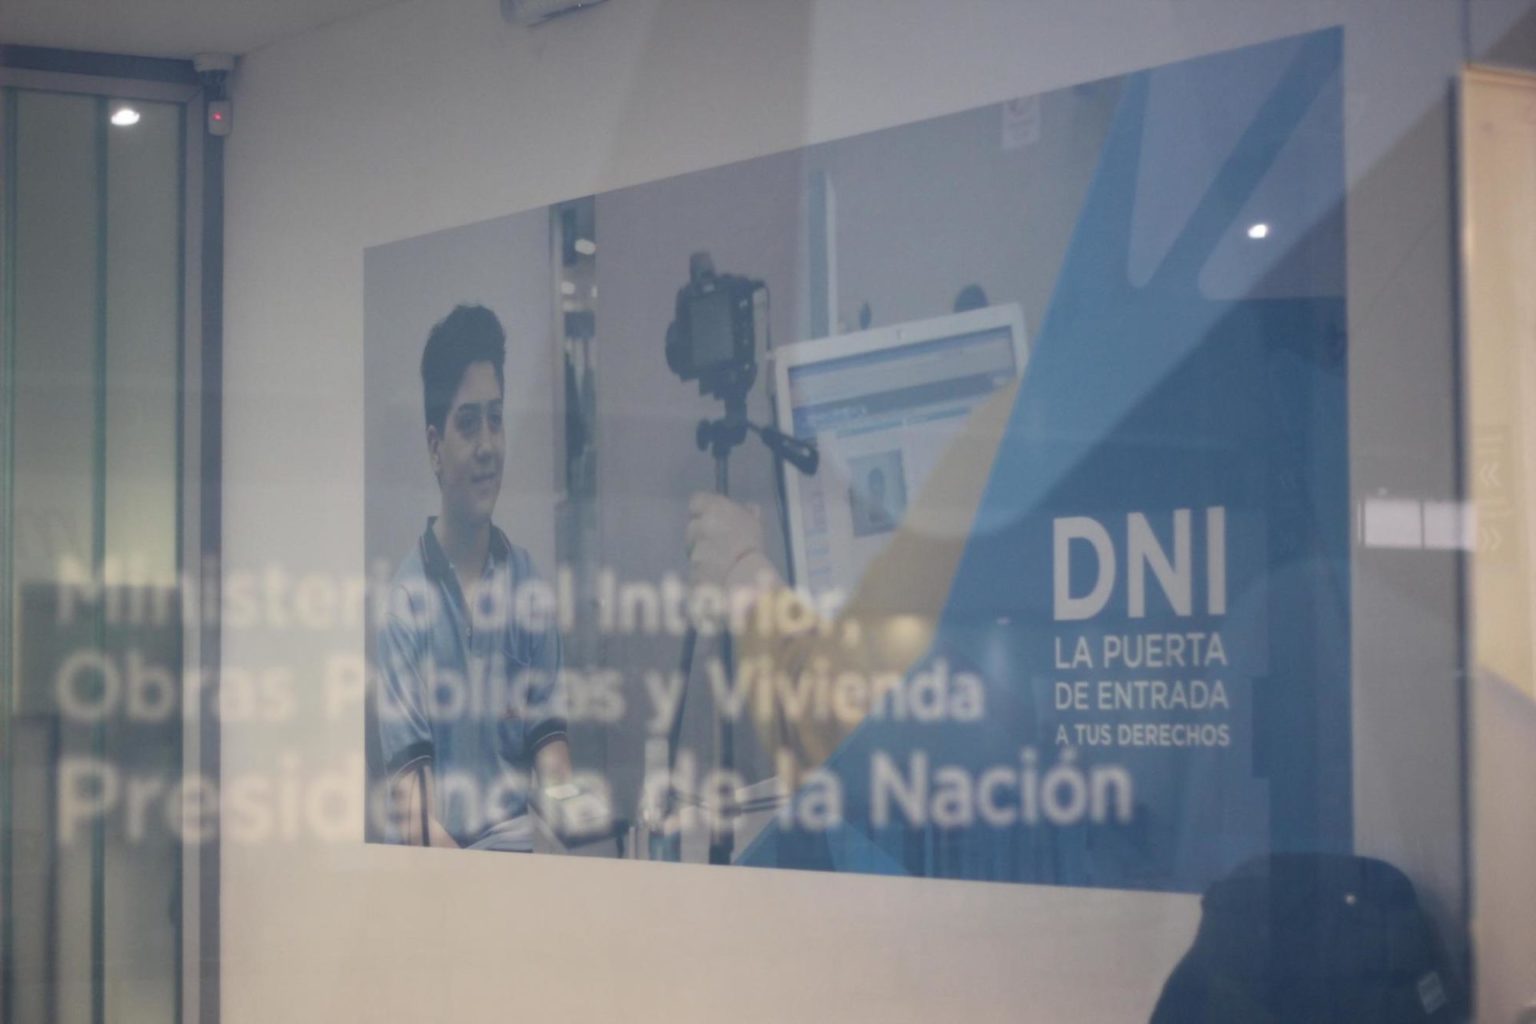 an image of the entrance to the DNI office in Argentina. A DNI is the main national identity document in Argentina.